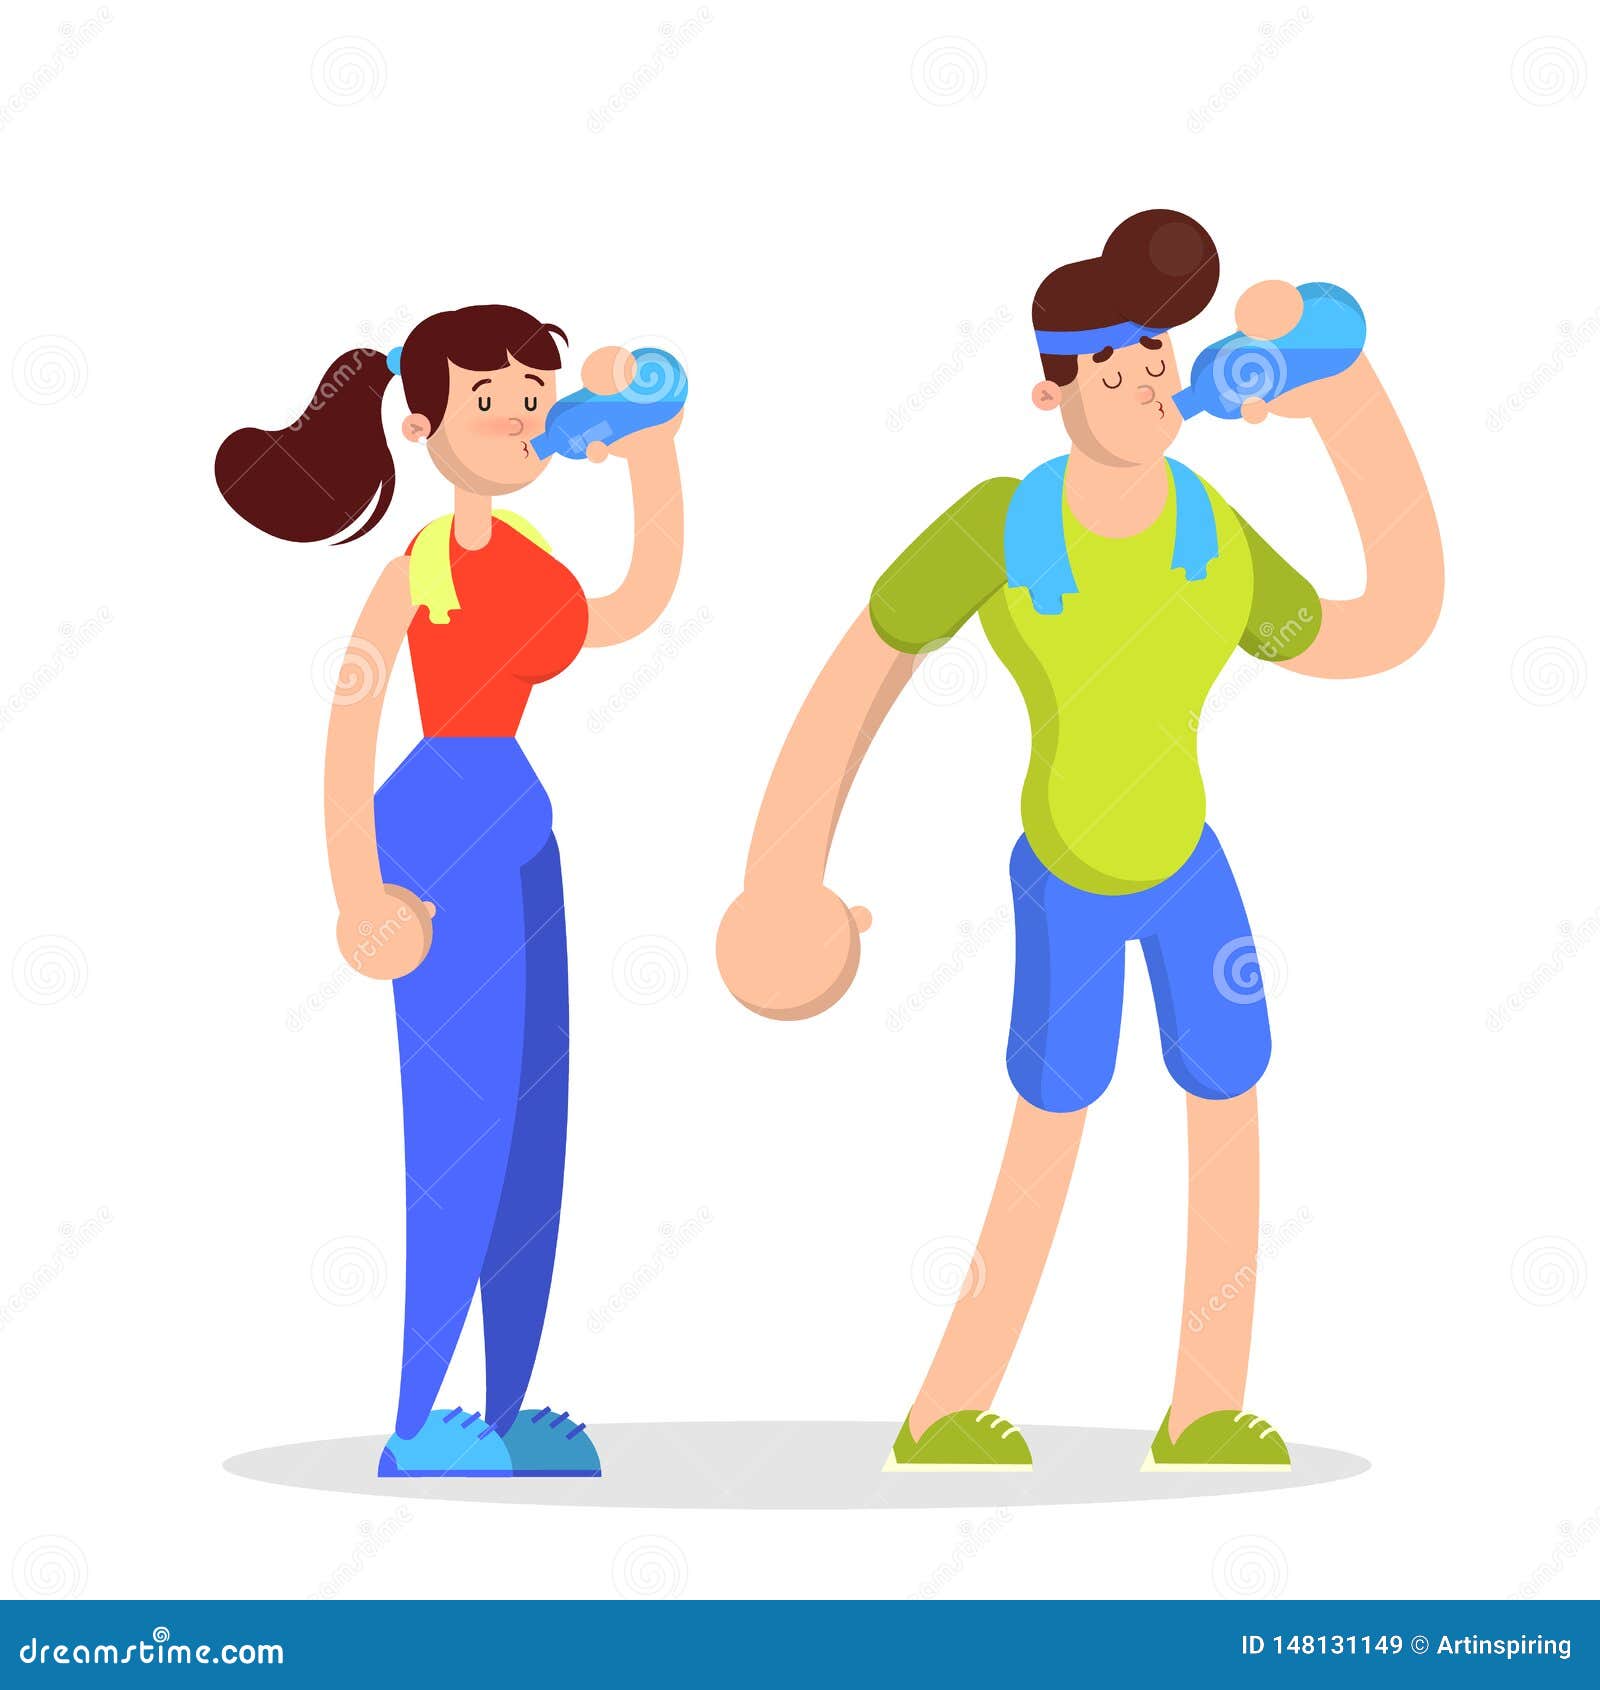 People Drink Water in Bottle during Workout Stock Vector - Illustration